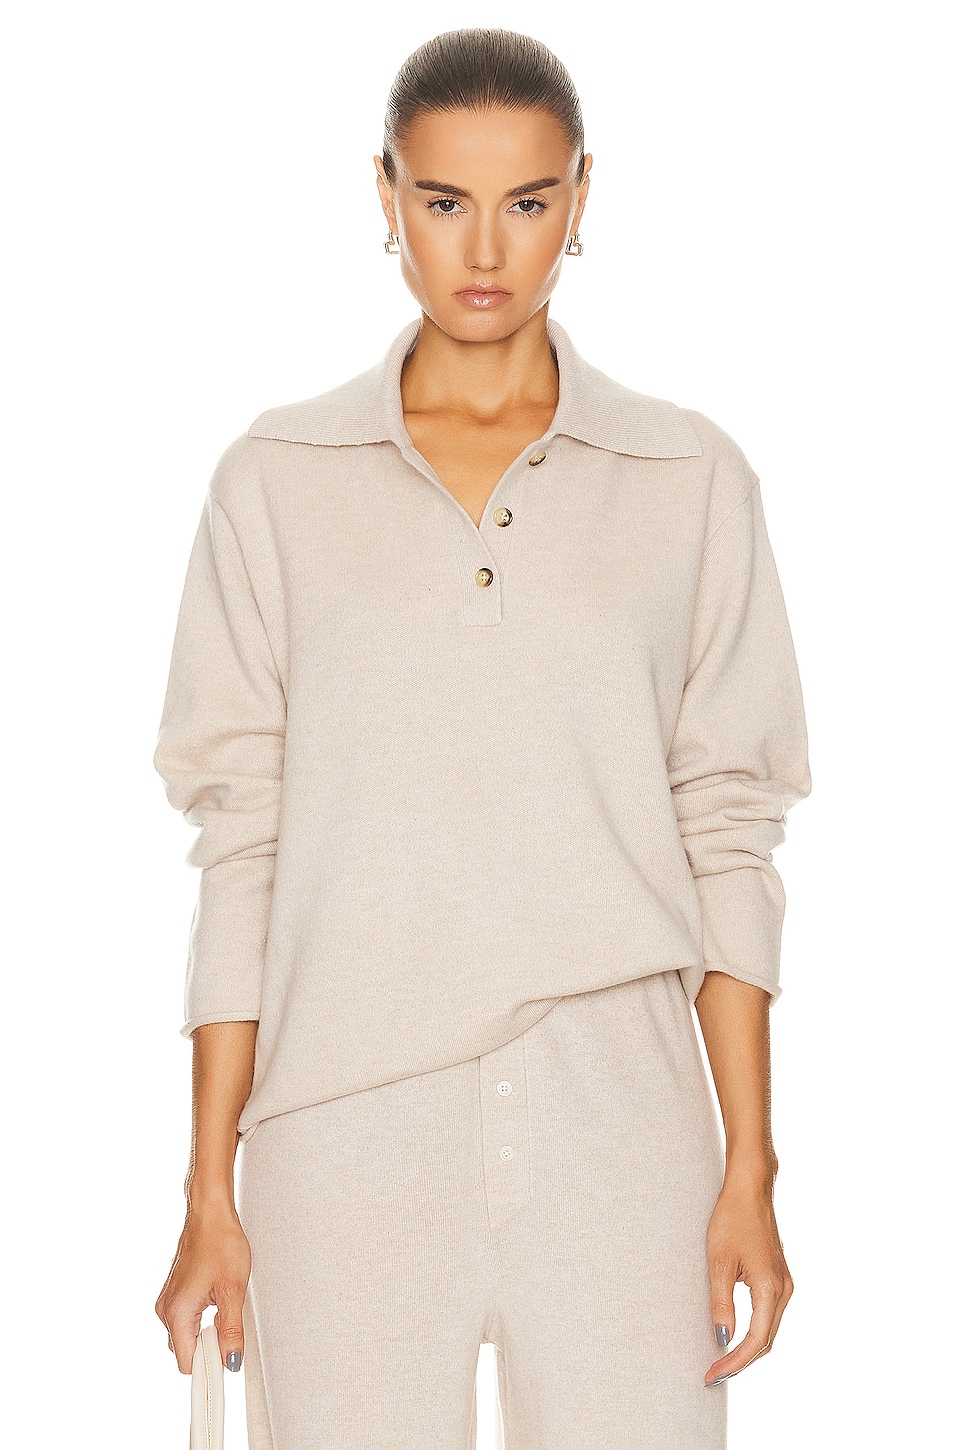 Image 1 of Guest In Residence Everyday Polo Top in Oatmeal